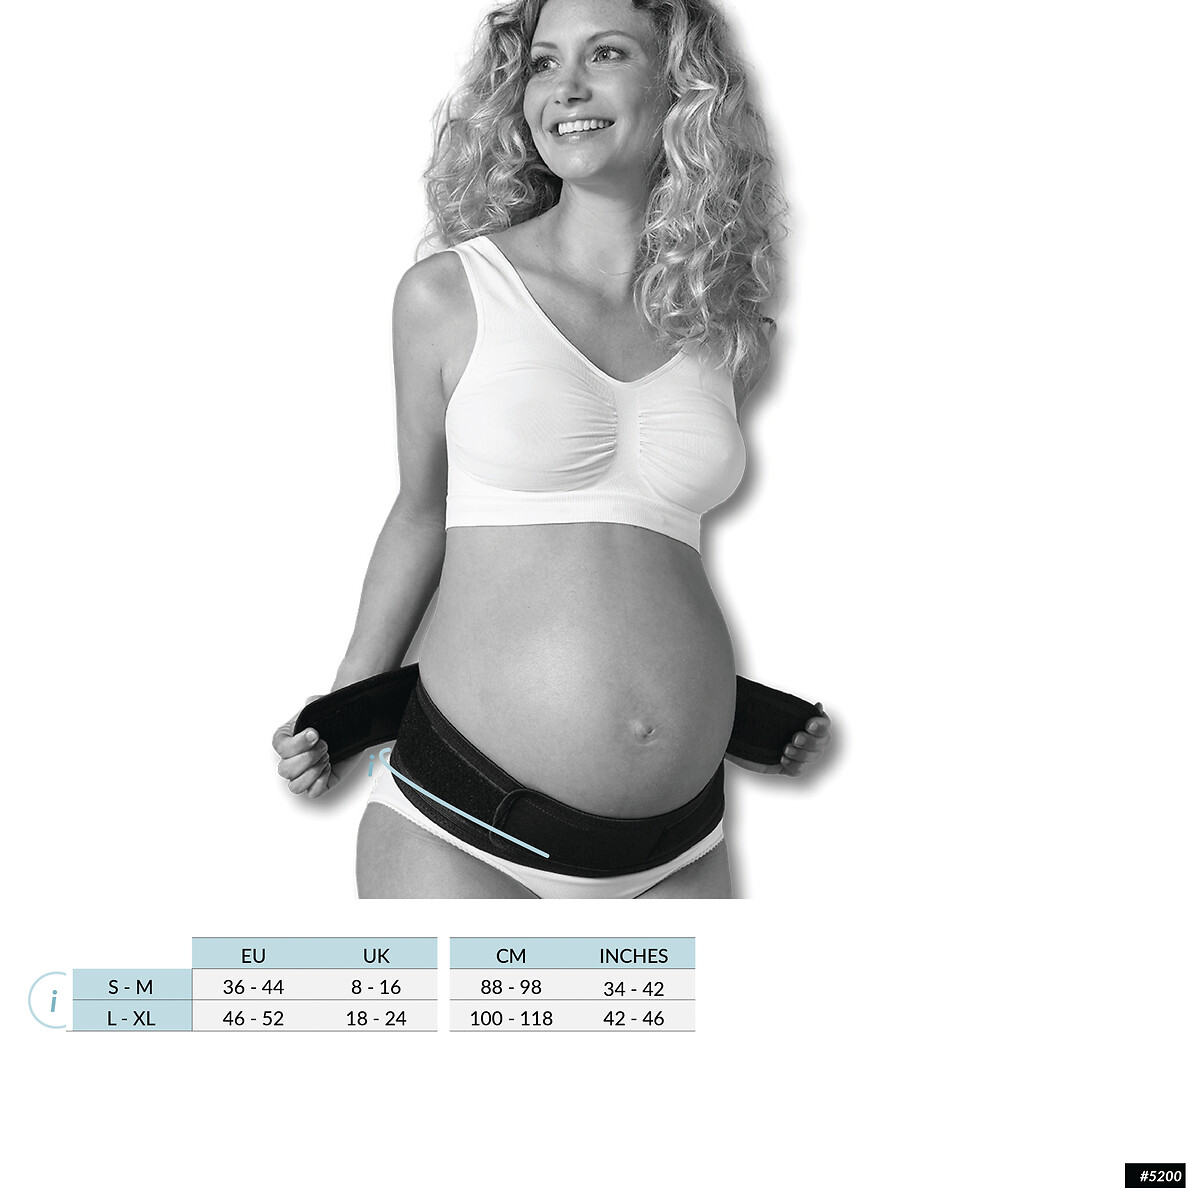 Carriwell Maternity Support Band - Black(Extra Large XL) for Mums - Peekaboo